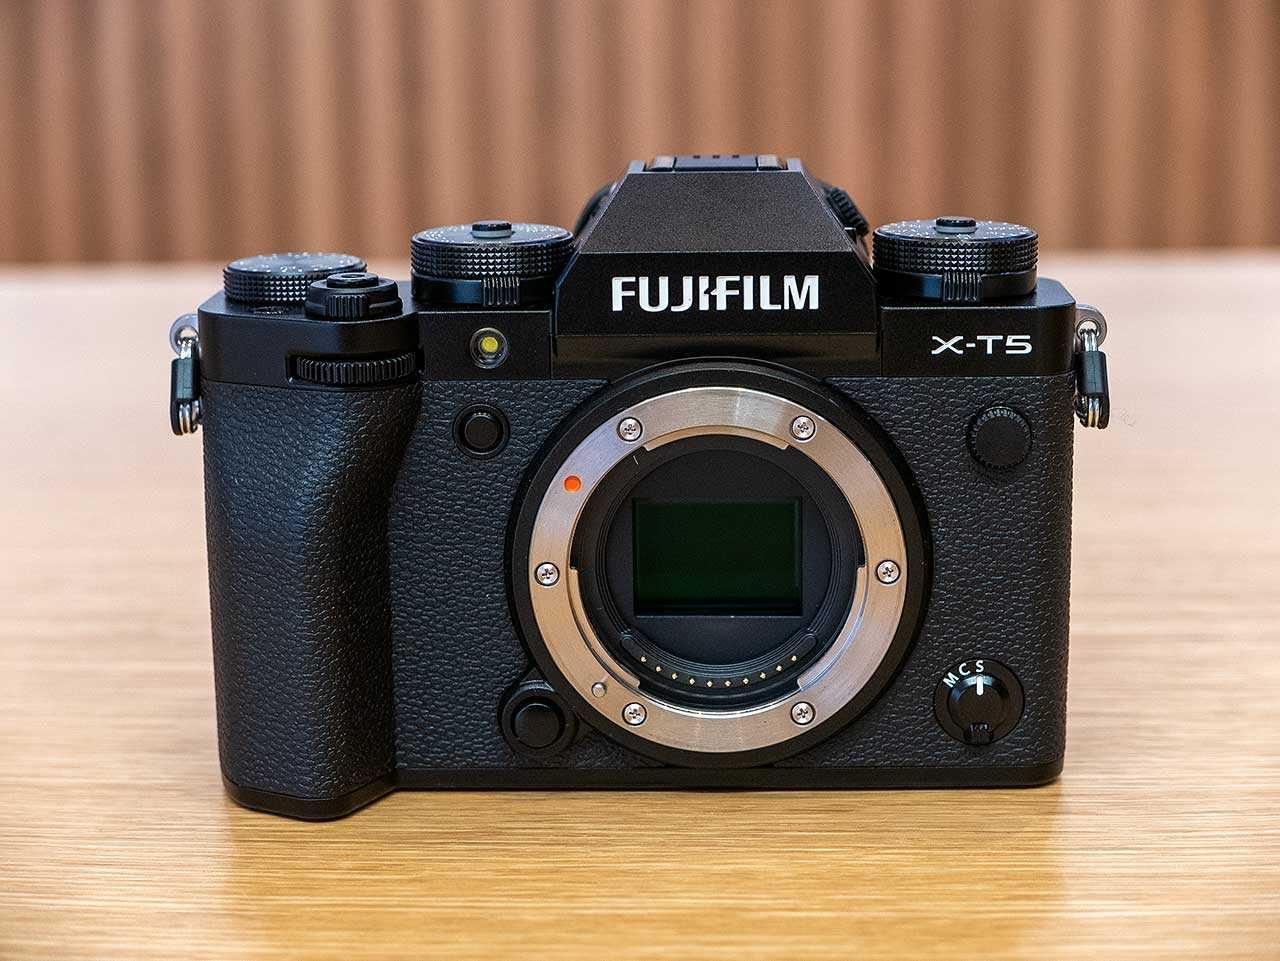 A Landscape photographers review of the Fujifilm XT5